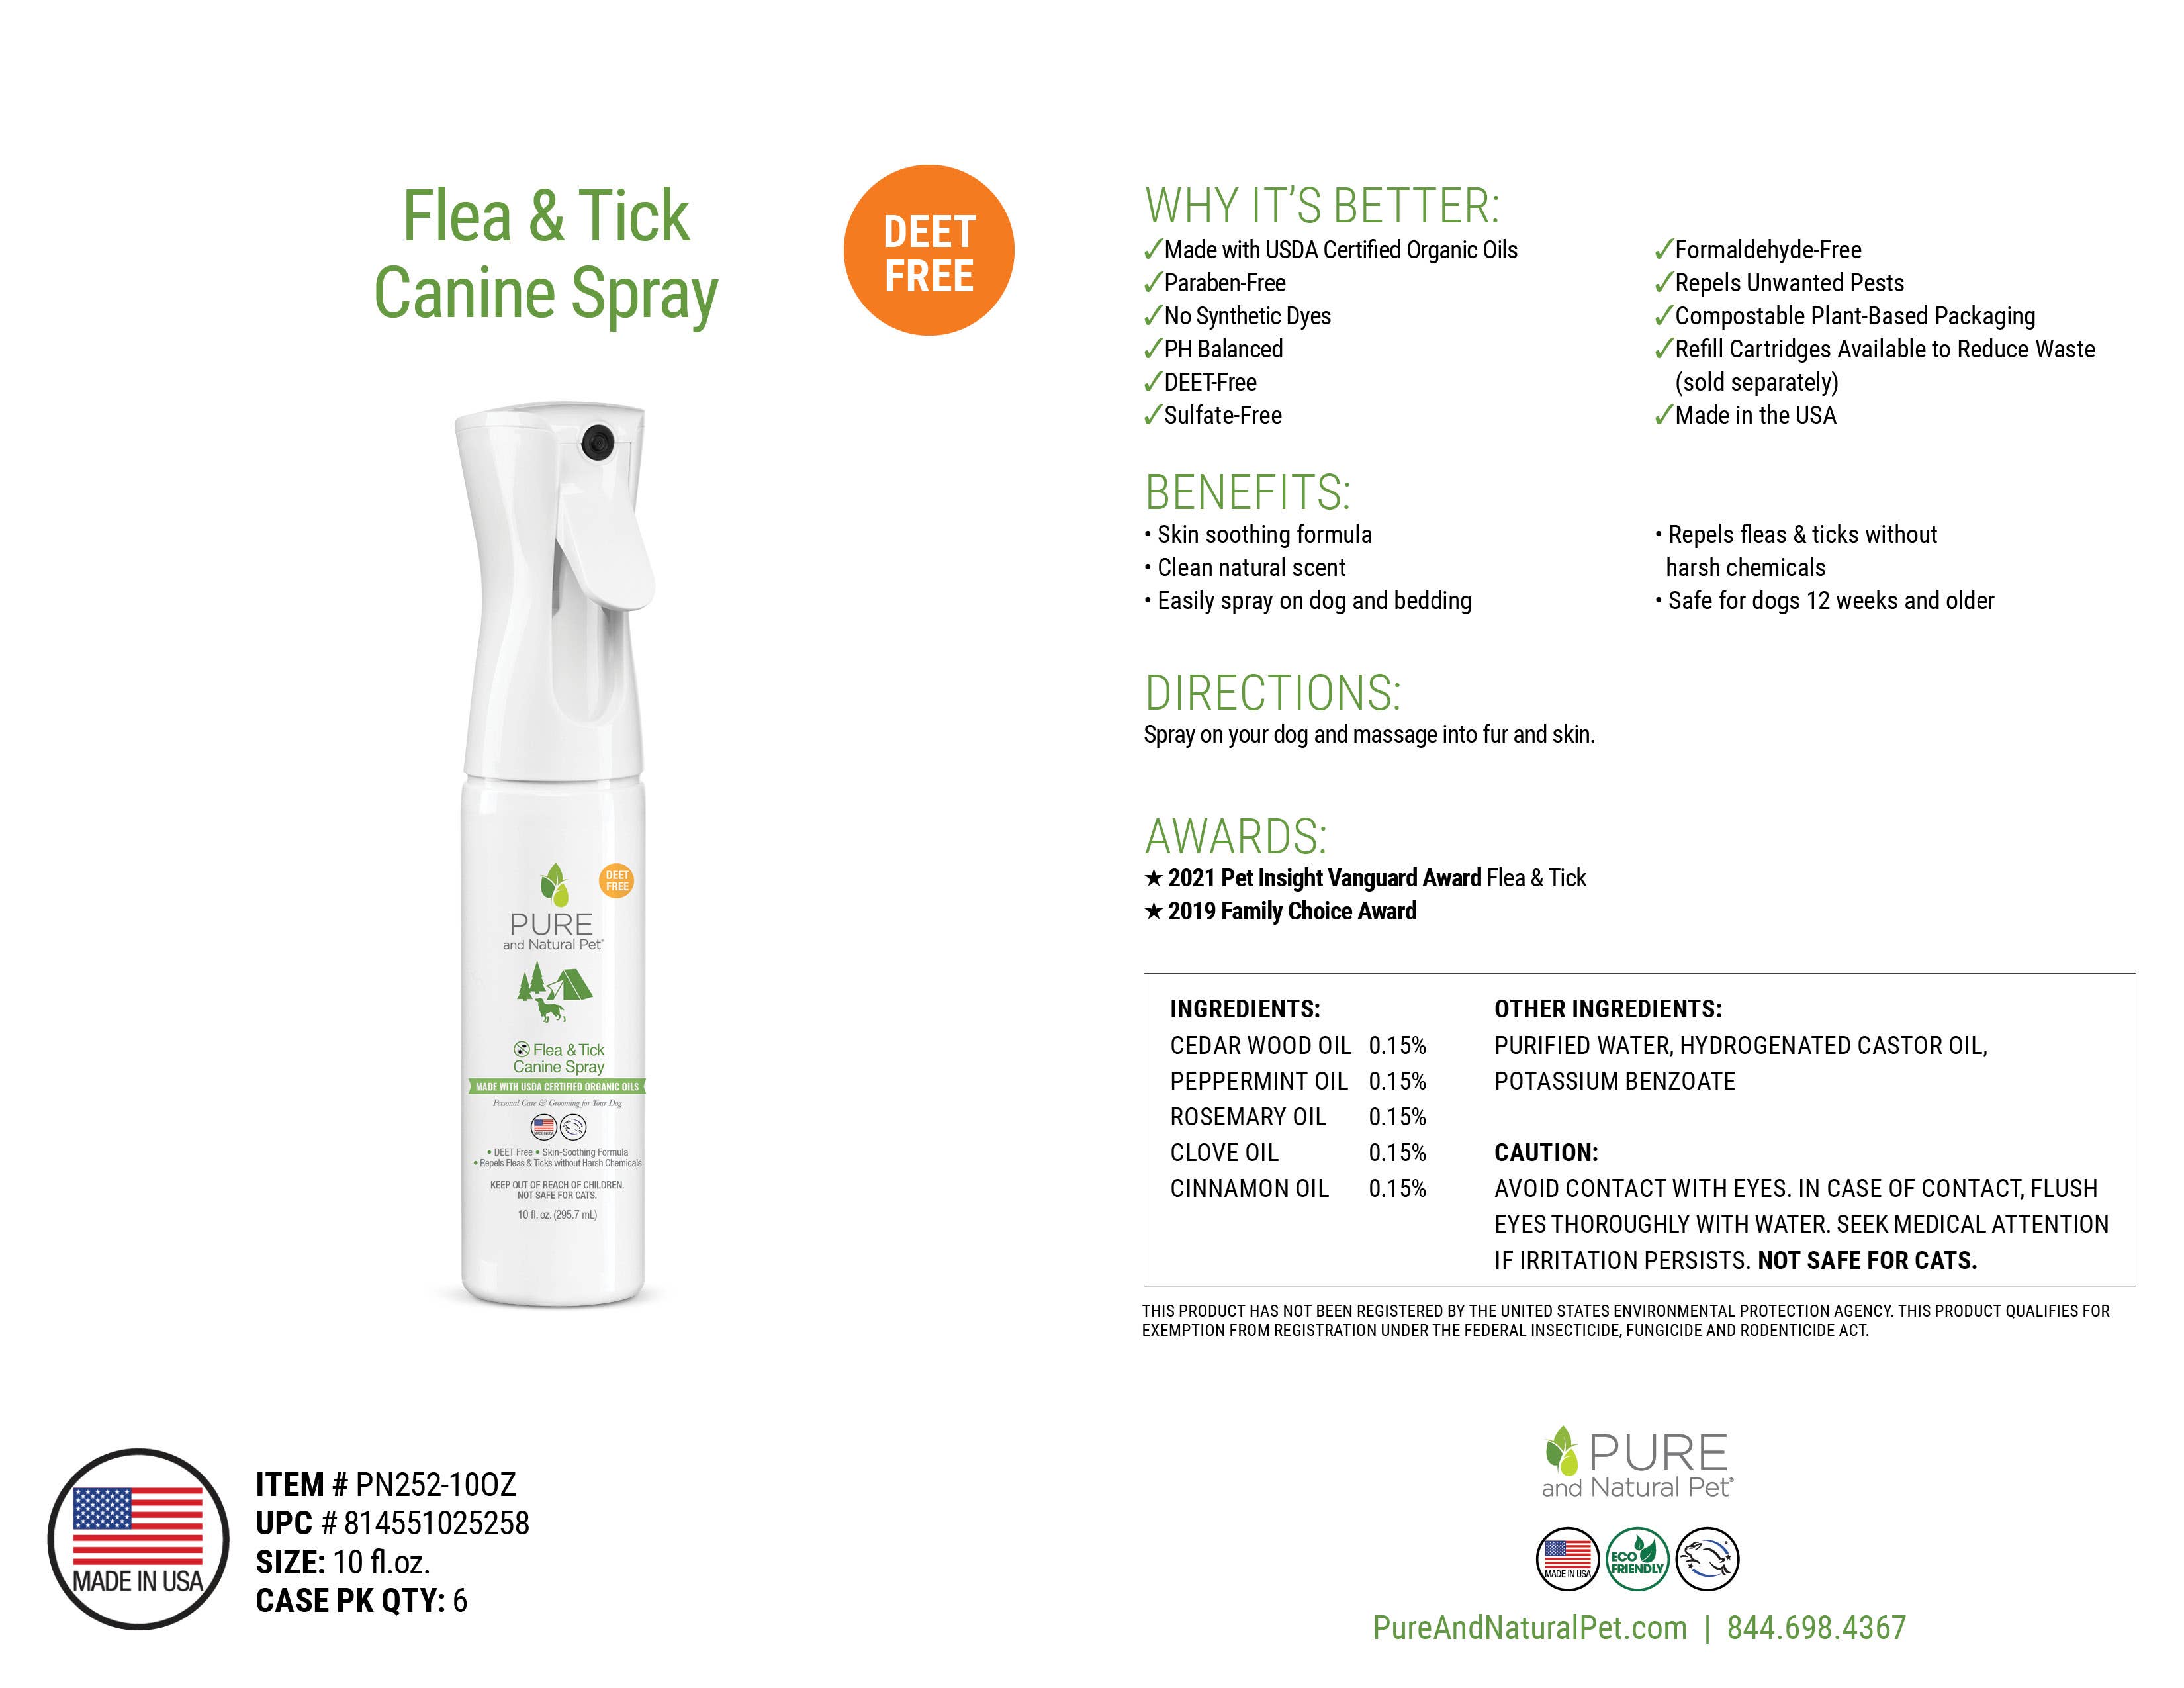 Pure and Natural Pet - Flea & Tick Canine Spray - Dogs